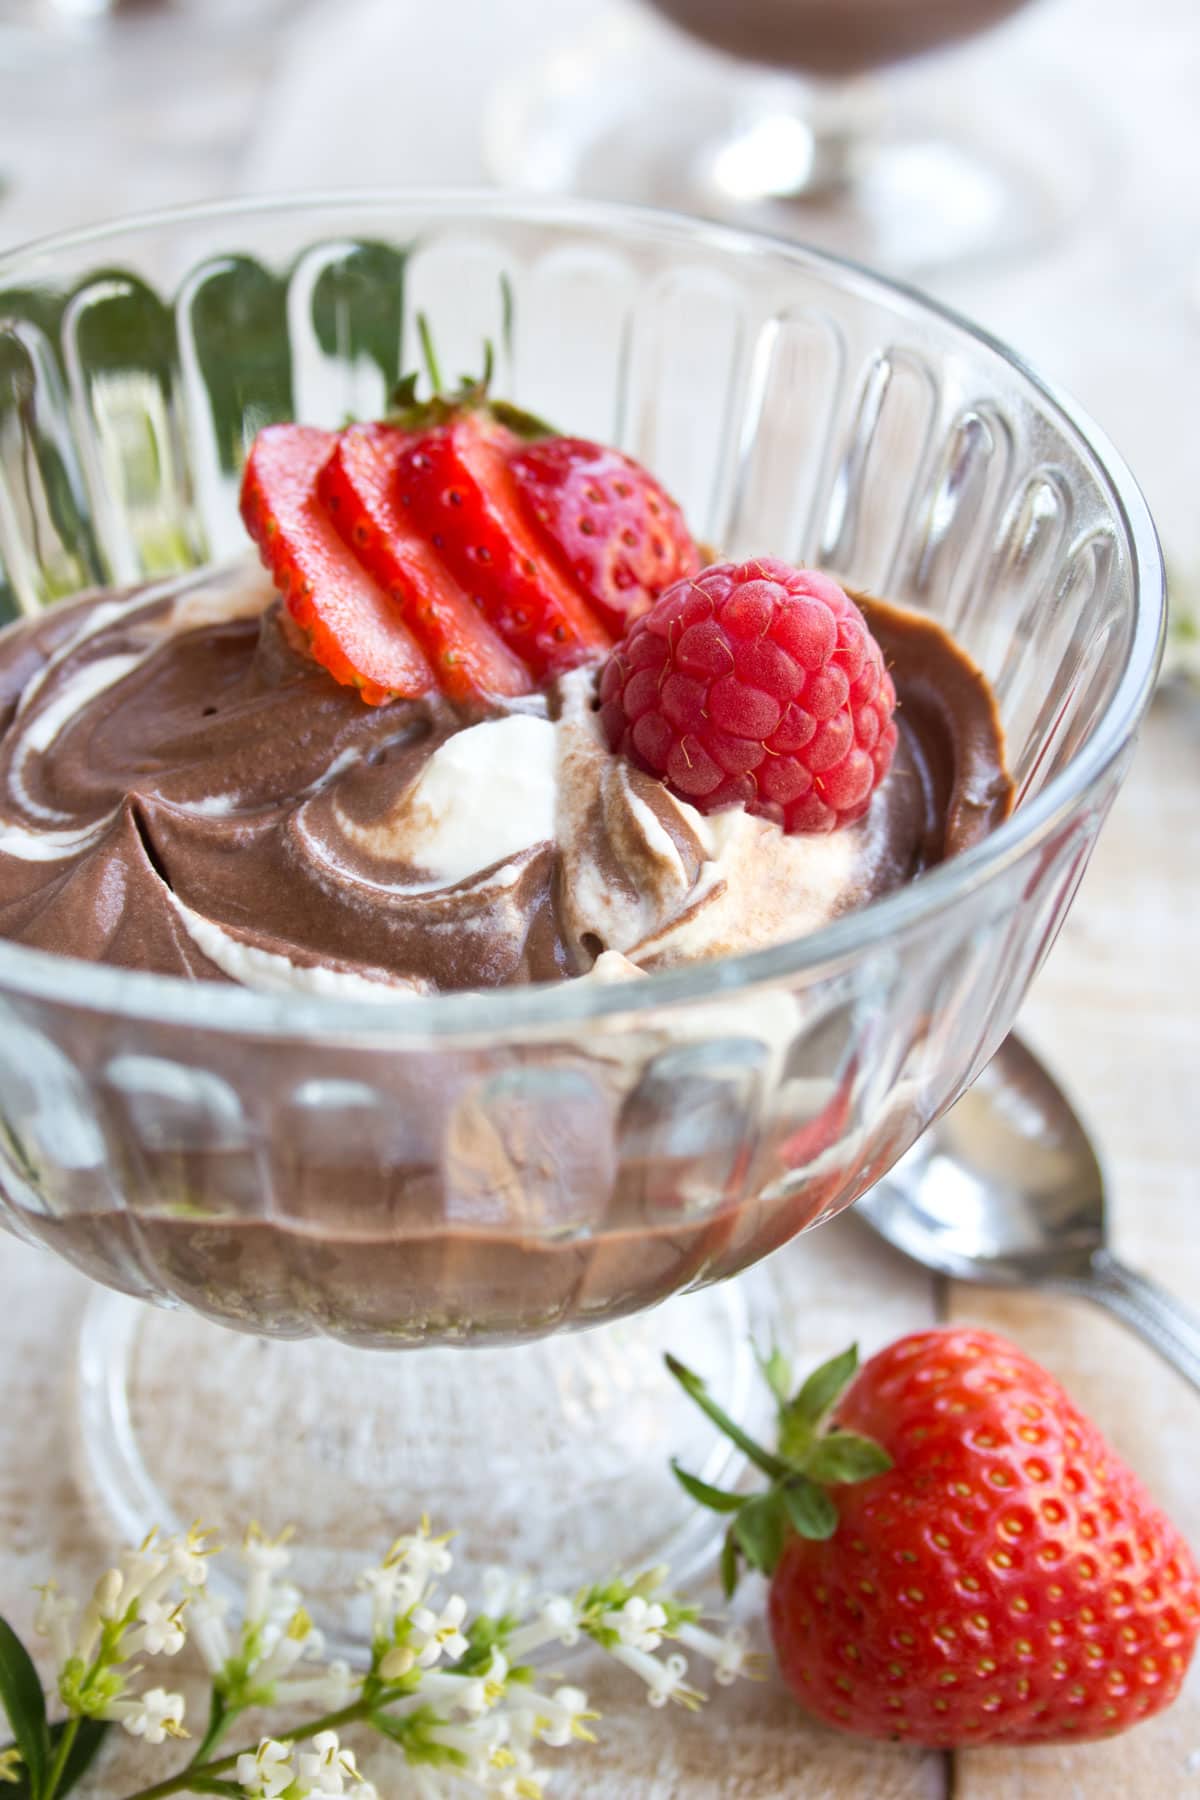 A keto mascarpone mousse consisting of a chocolate and a vanilla mousse swirled together n a glass cup decorated with strawberries and raspberries.